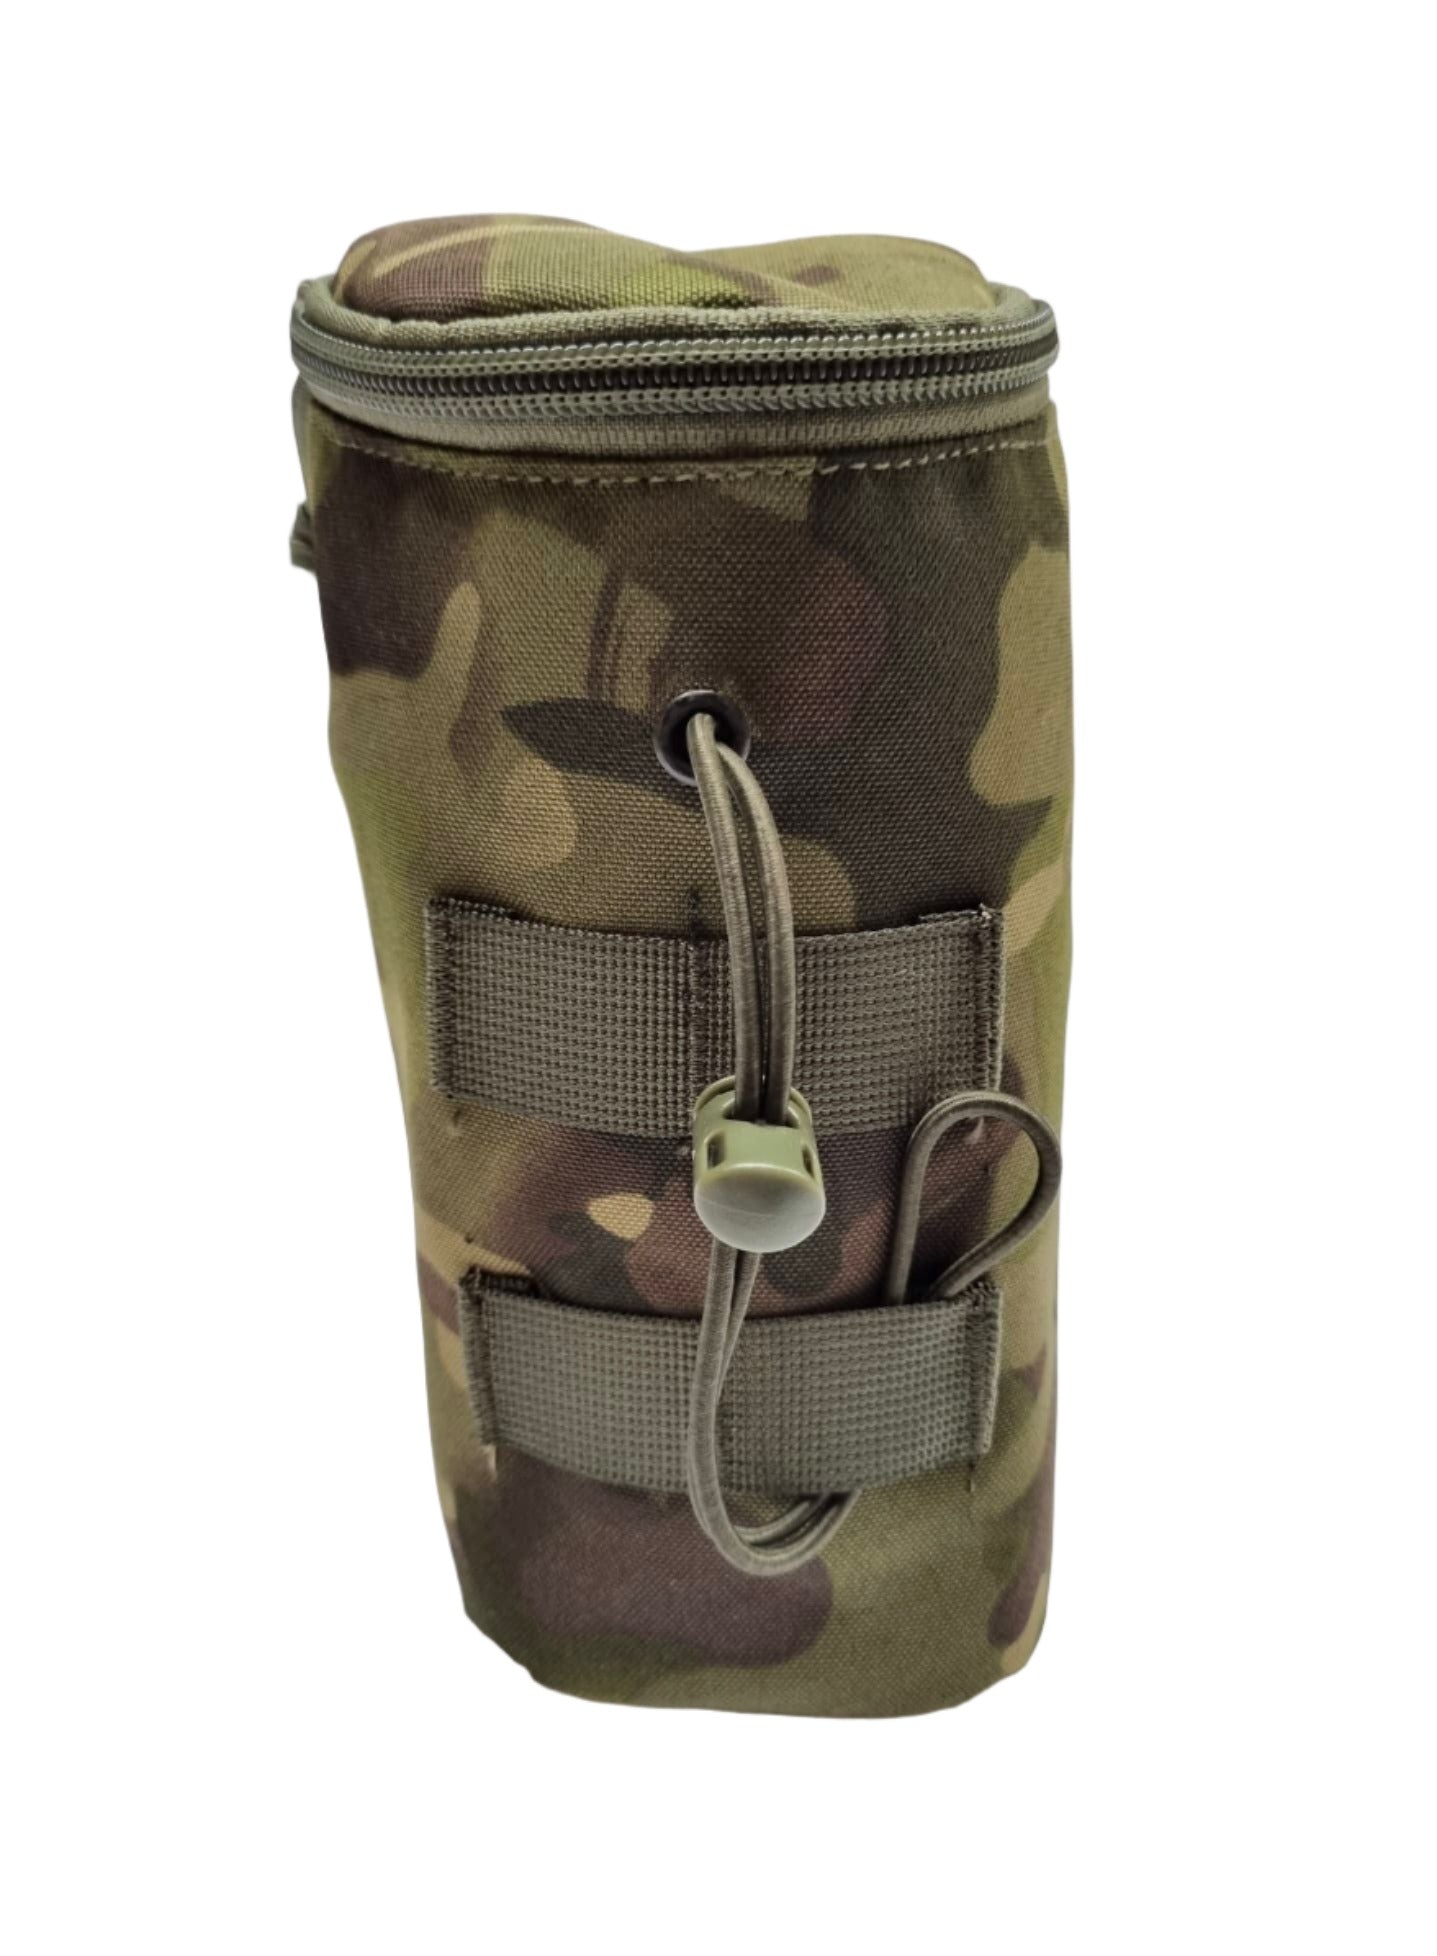 SHE-21037 Insulated water bottle holder MULTICAM TEMPERATE